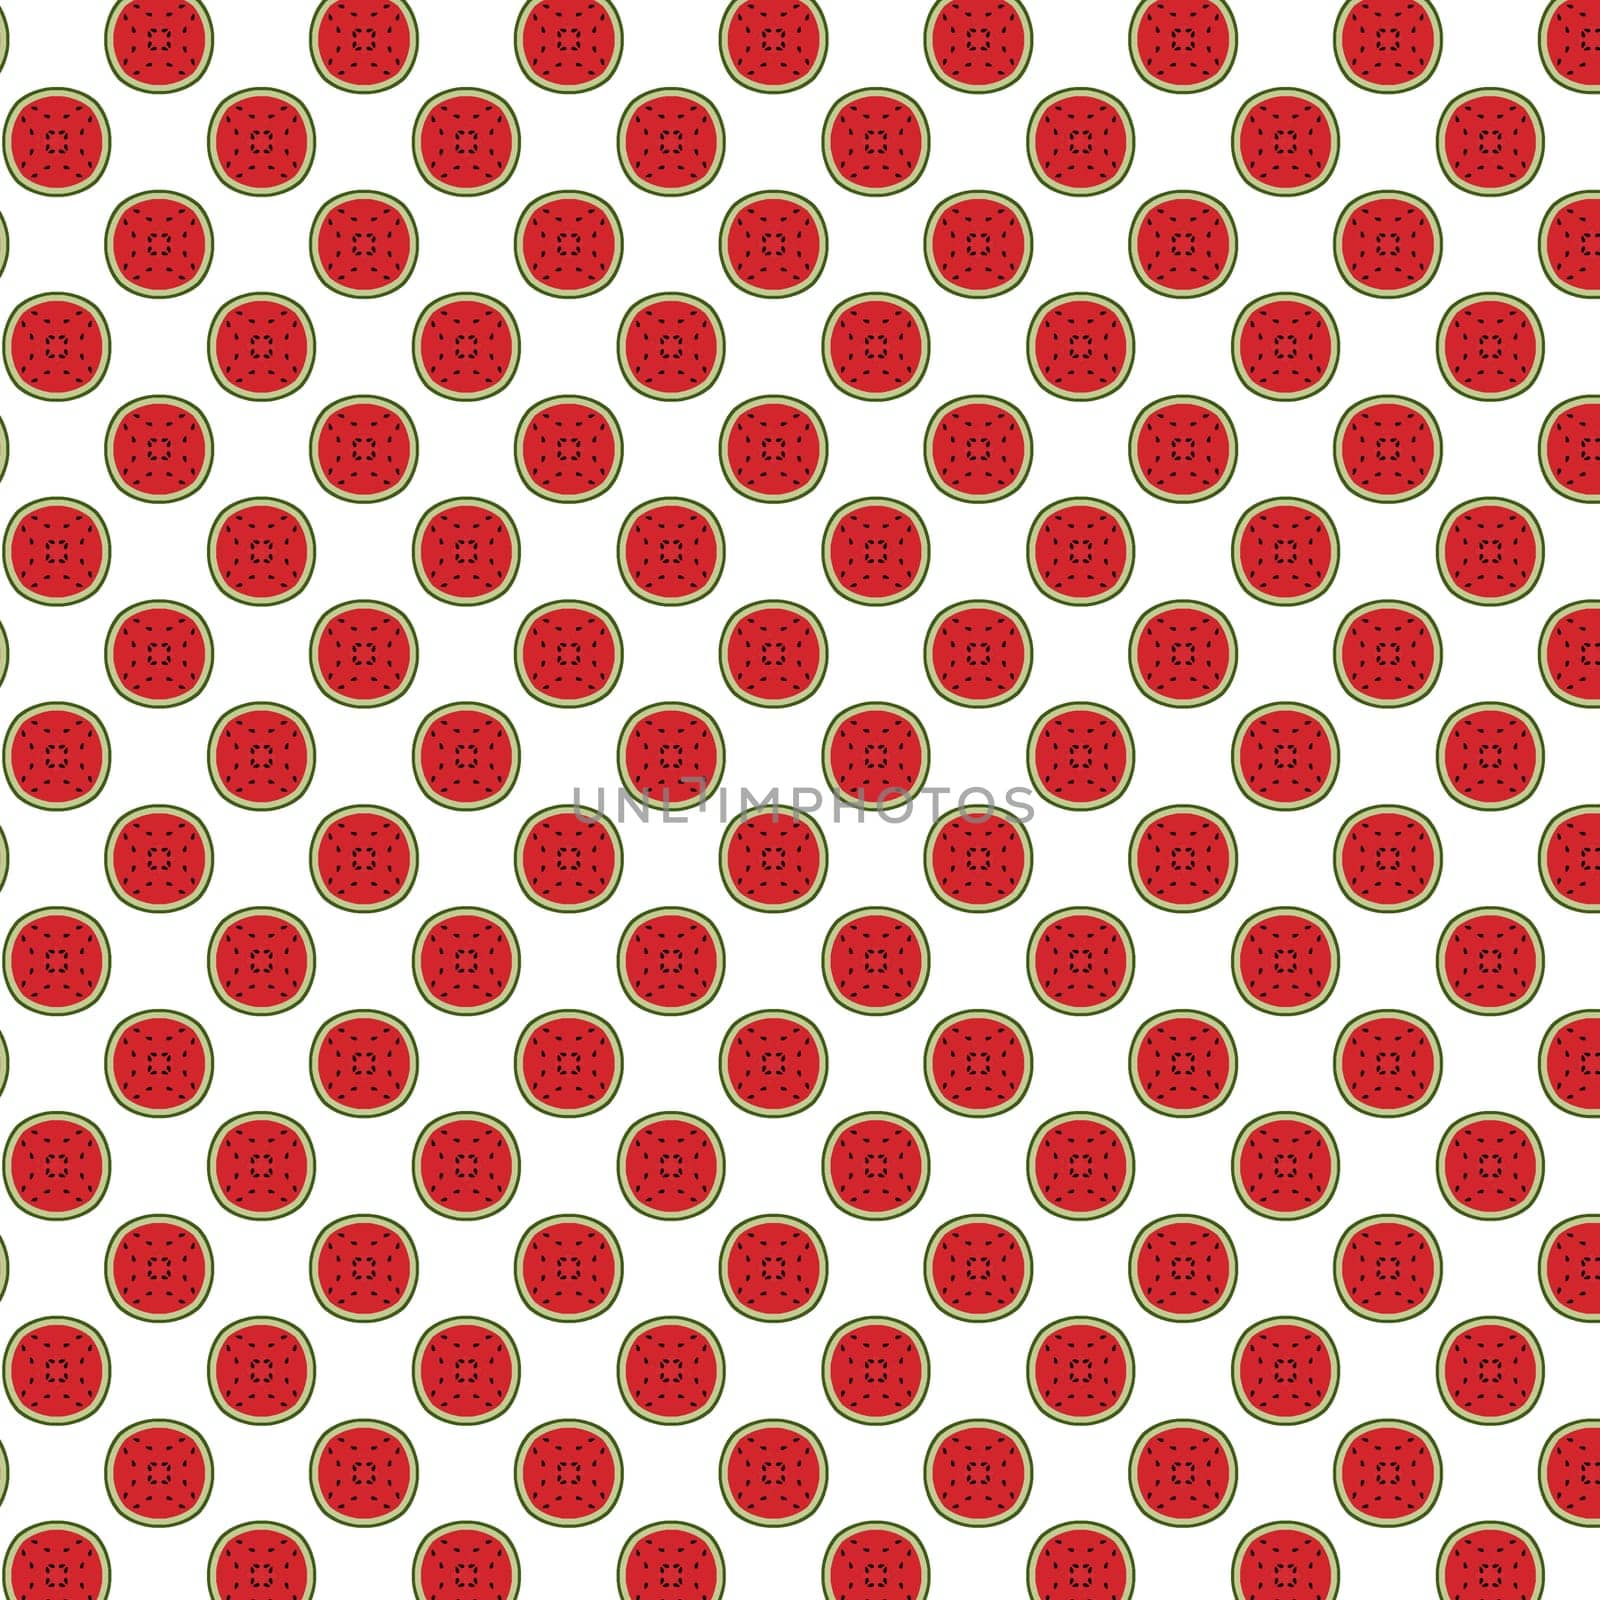 Abstract red seamless pattern on white background for usage as an aesthetic and a decorative element